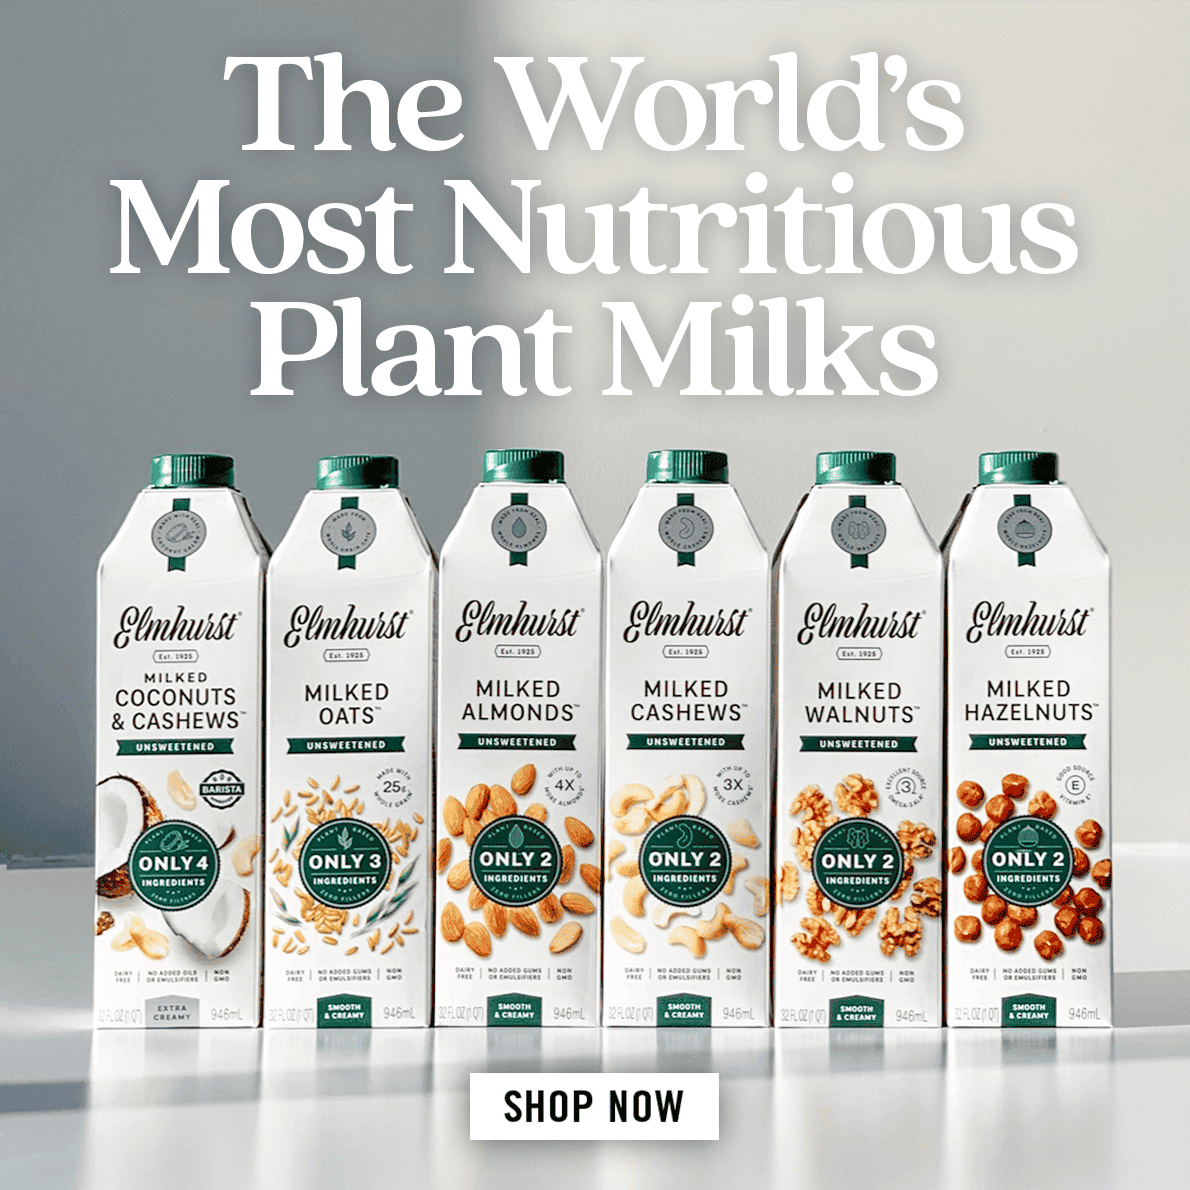 The World's Most Nutritious Plant Milks